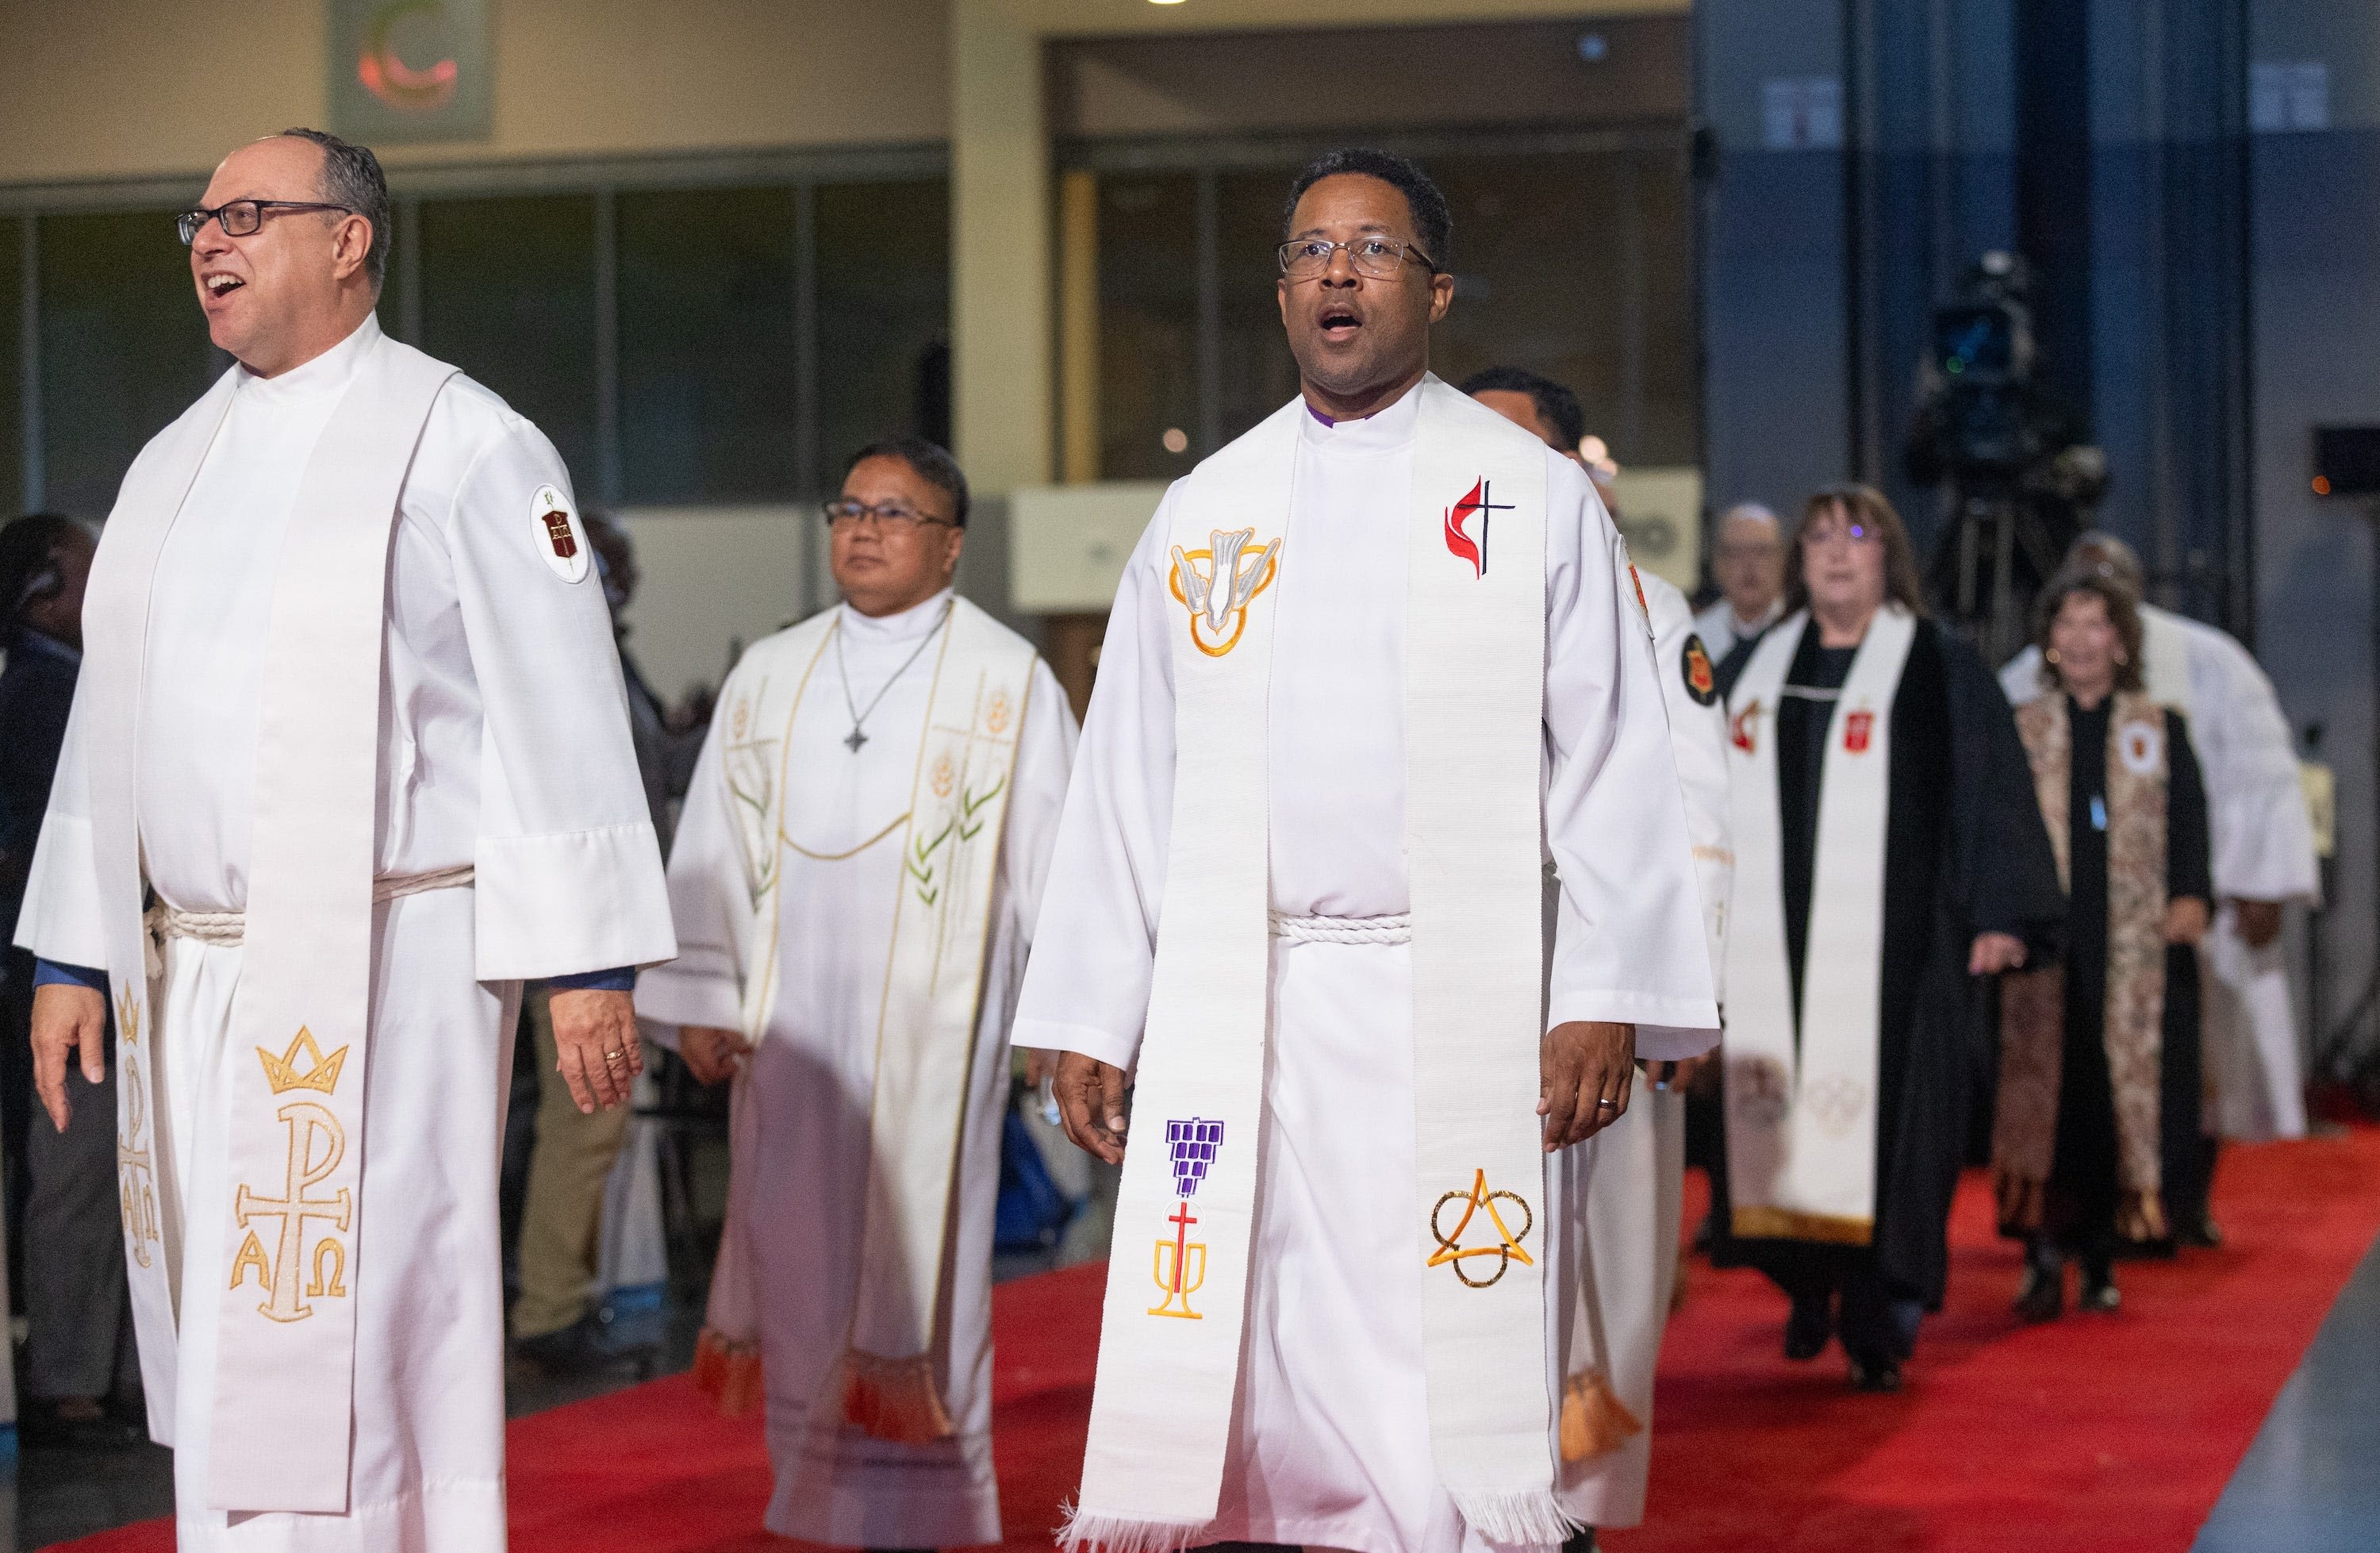 UMC Monday updates: United Methodist conference faces key decisions on LGBTQ+ rights, budget